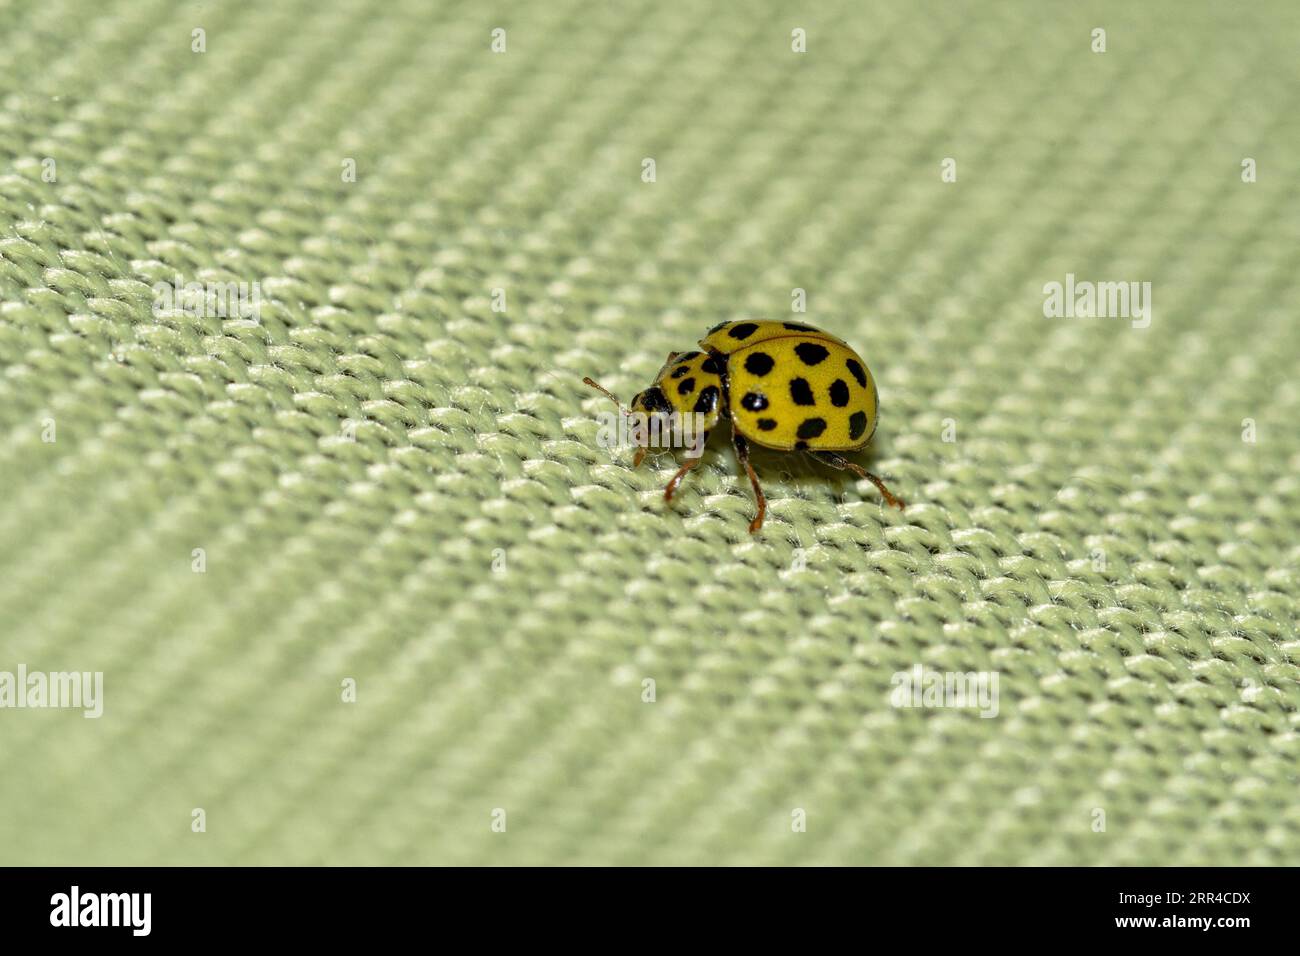 Yellow ladybug seen in close-up Stock Photo